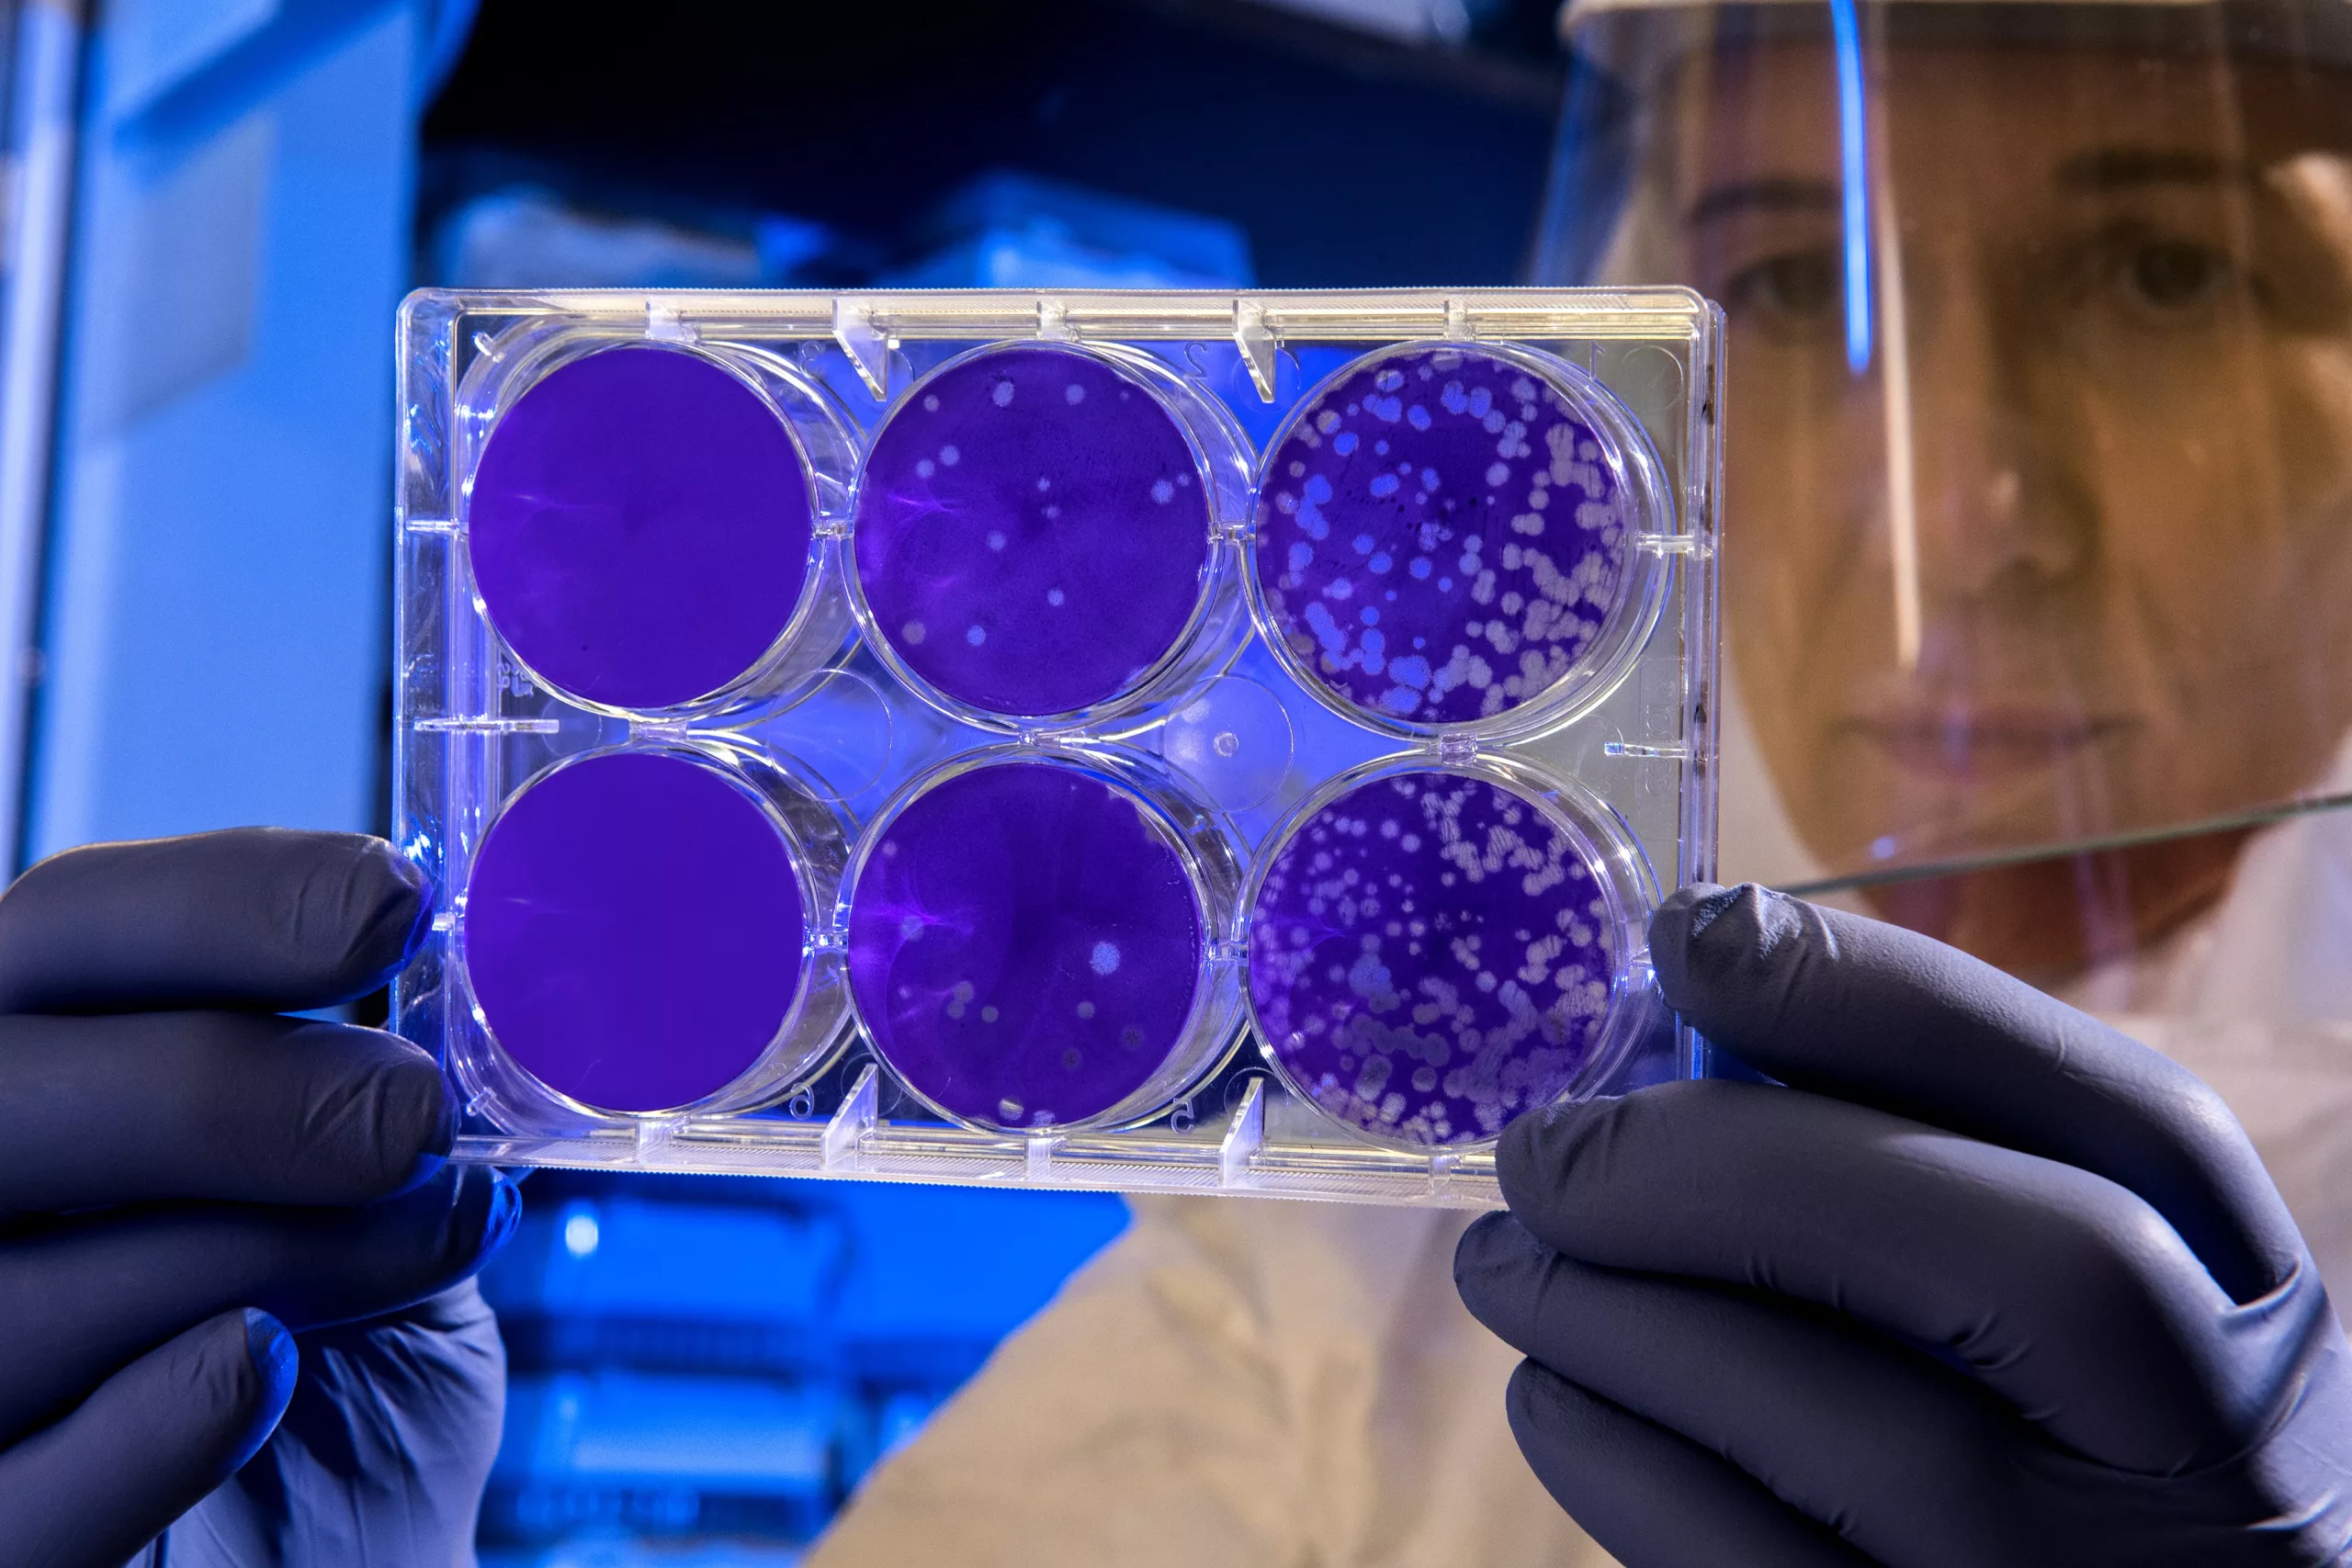 A scientist examines petri dishes used for studying microbes